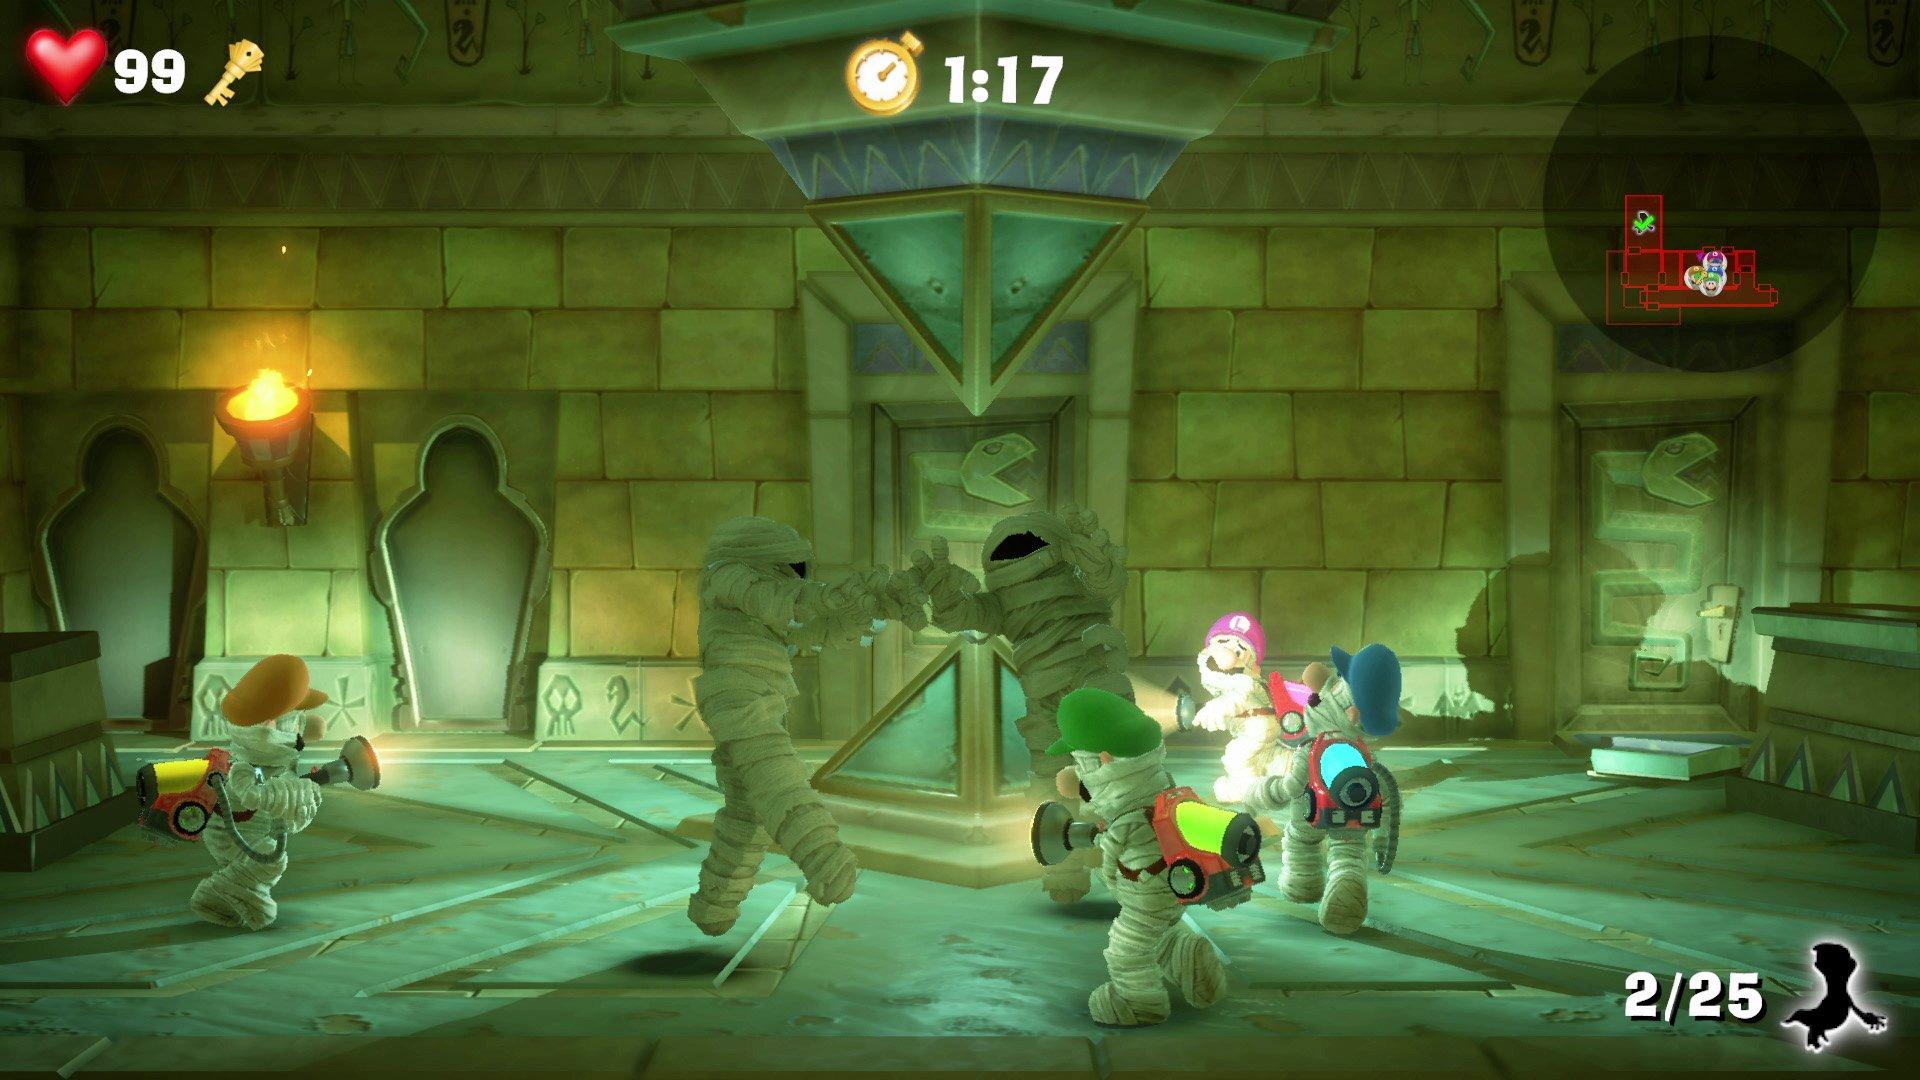 Luigi's Mansion 4 Could Be the Ghost Hunter's Biggest Adventure